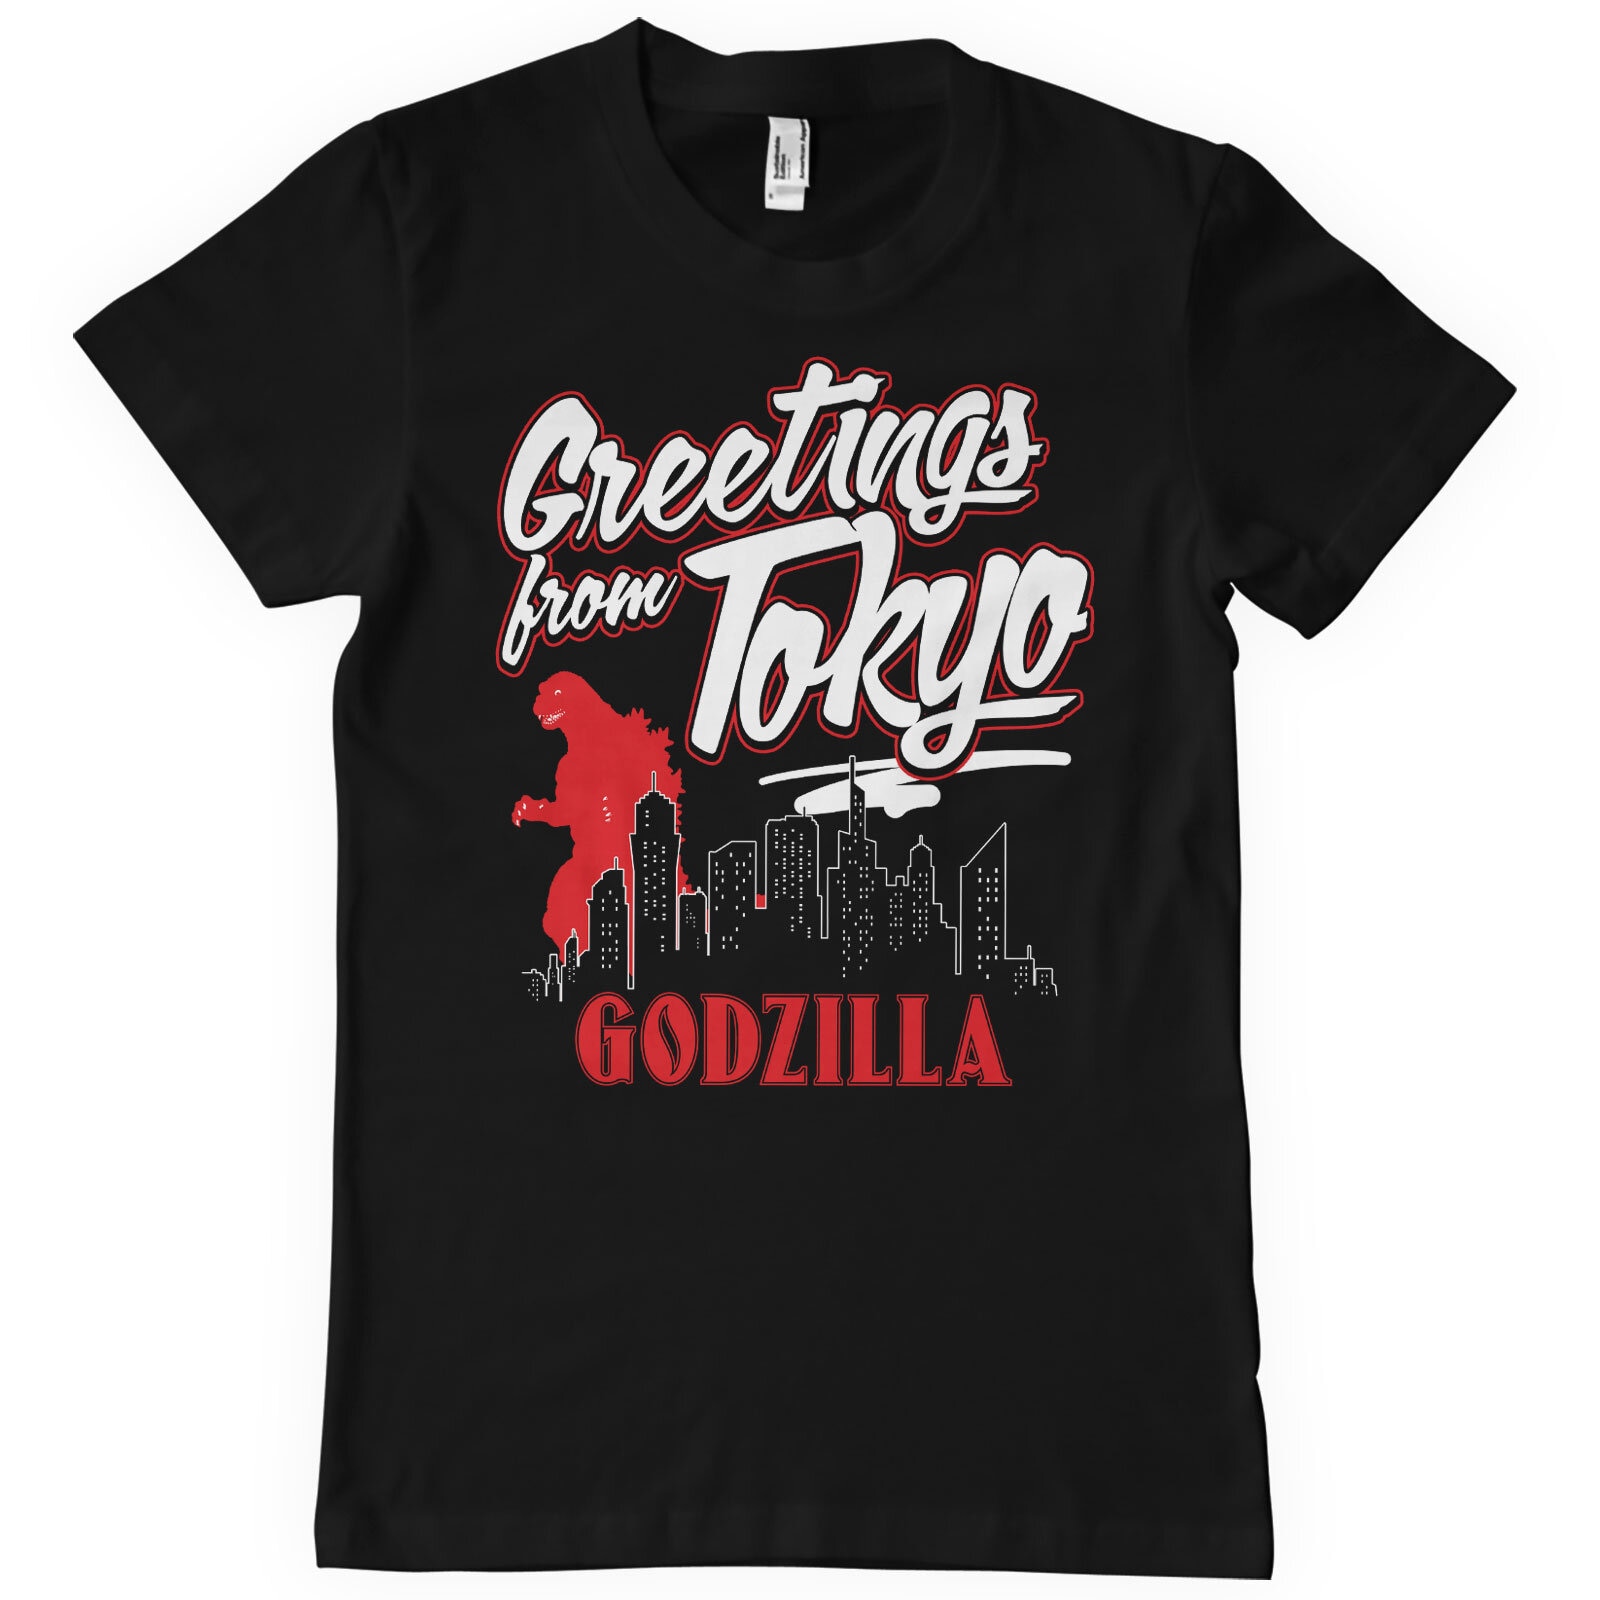 Greeting From Tokyo T-Shirt